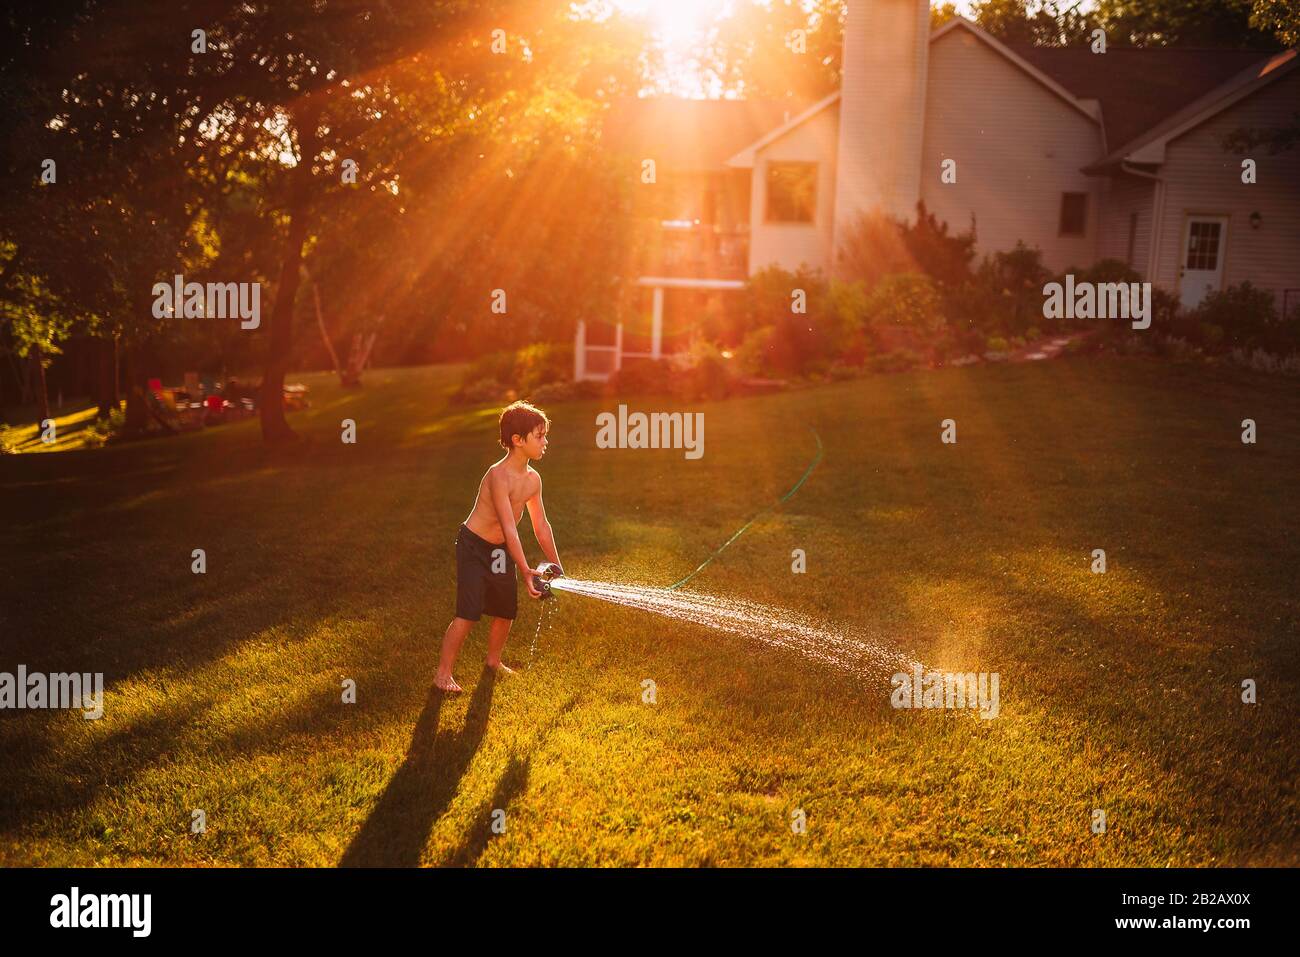 Boy standing in a garden playing with a water sprinkler, USA Stock Photo